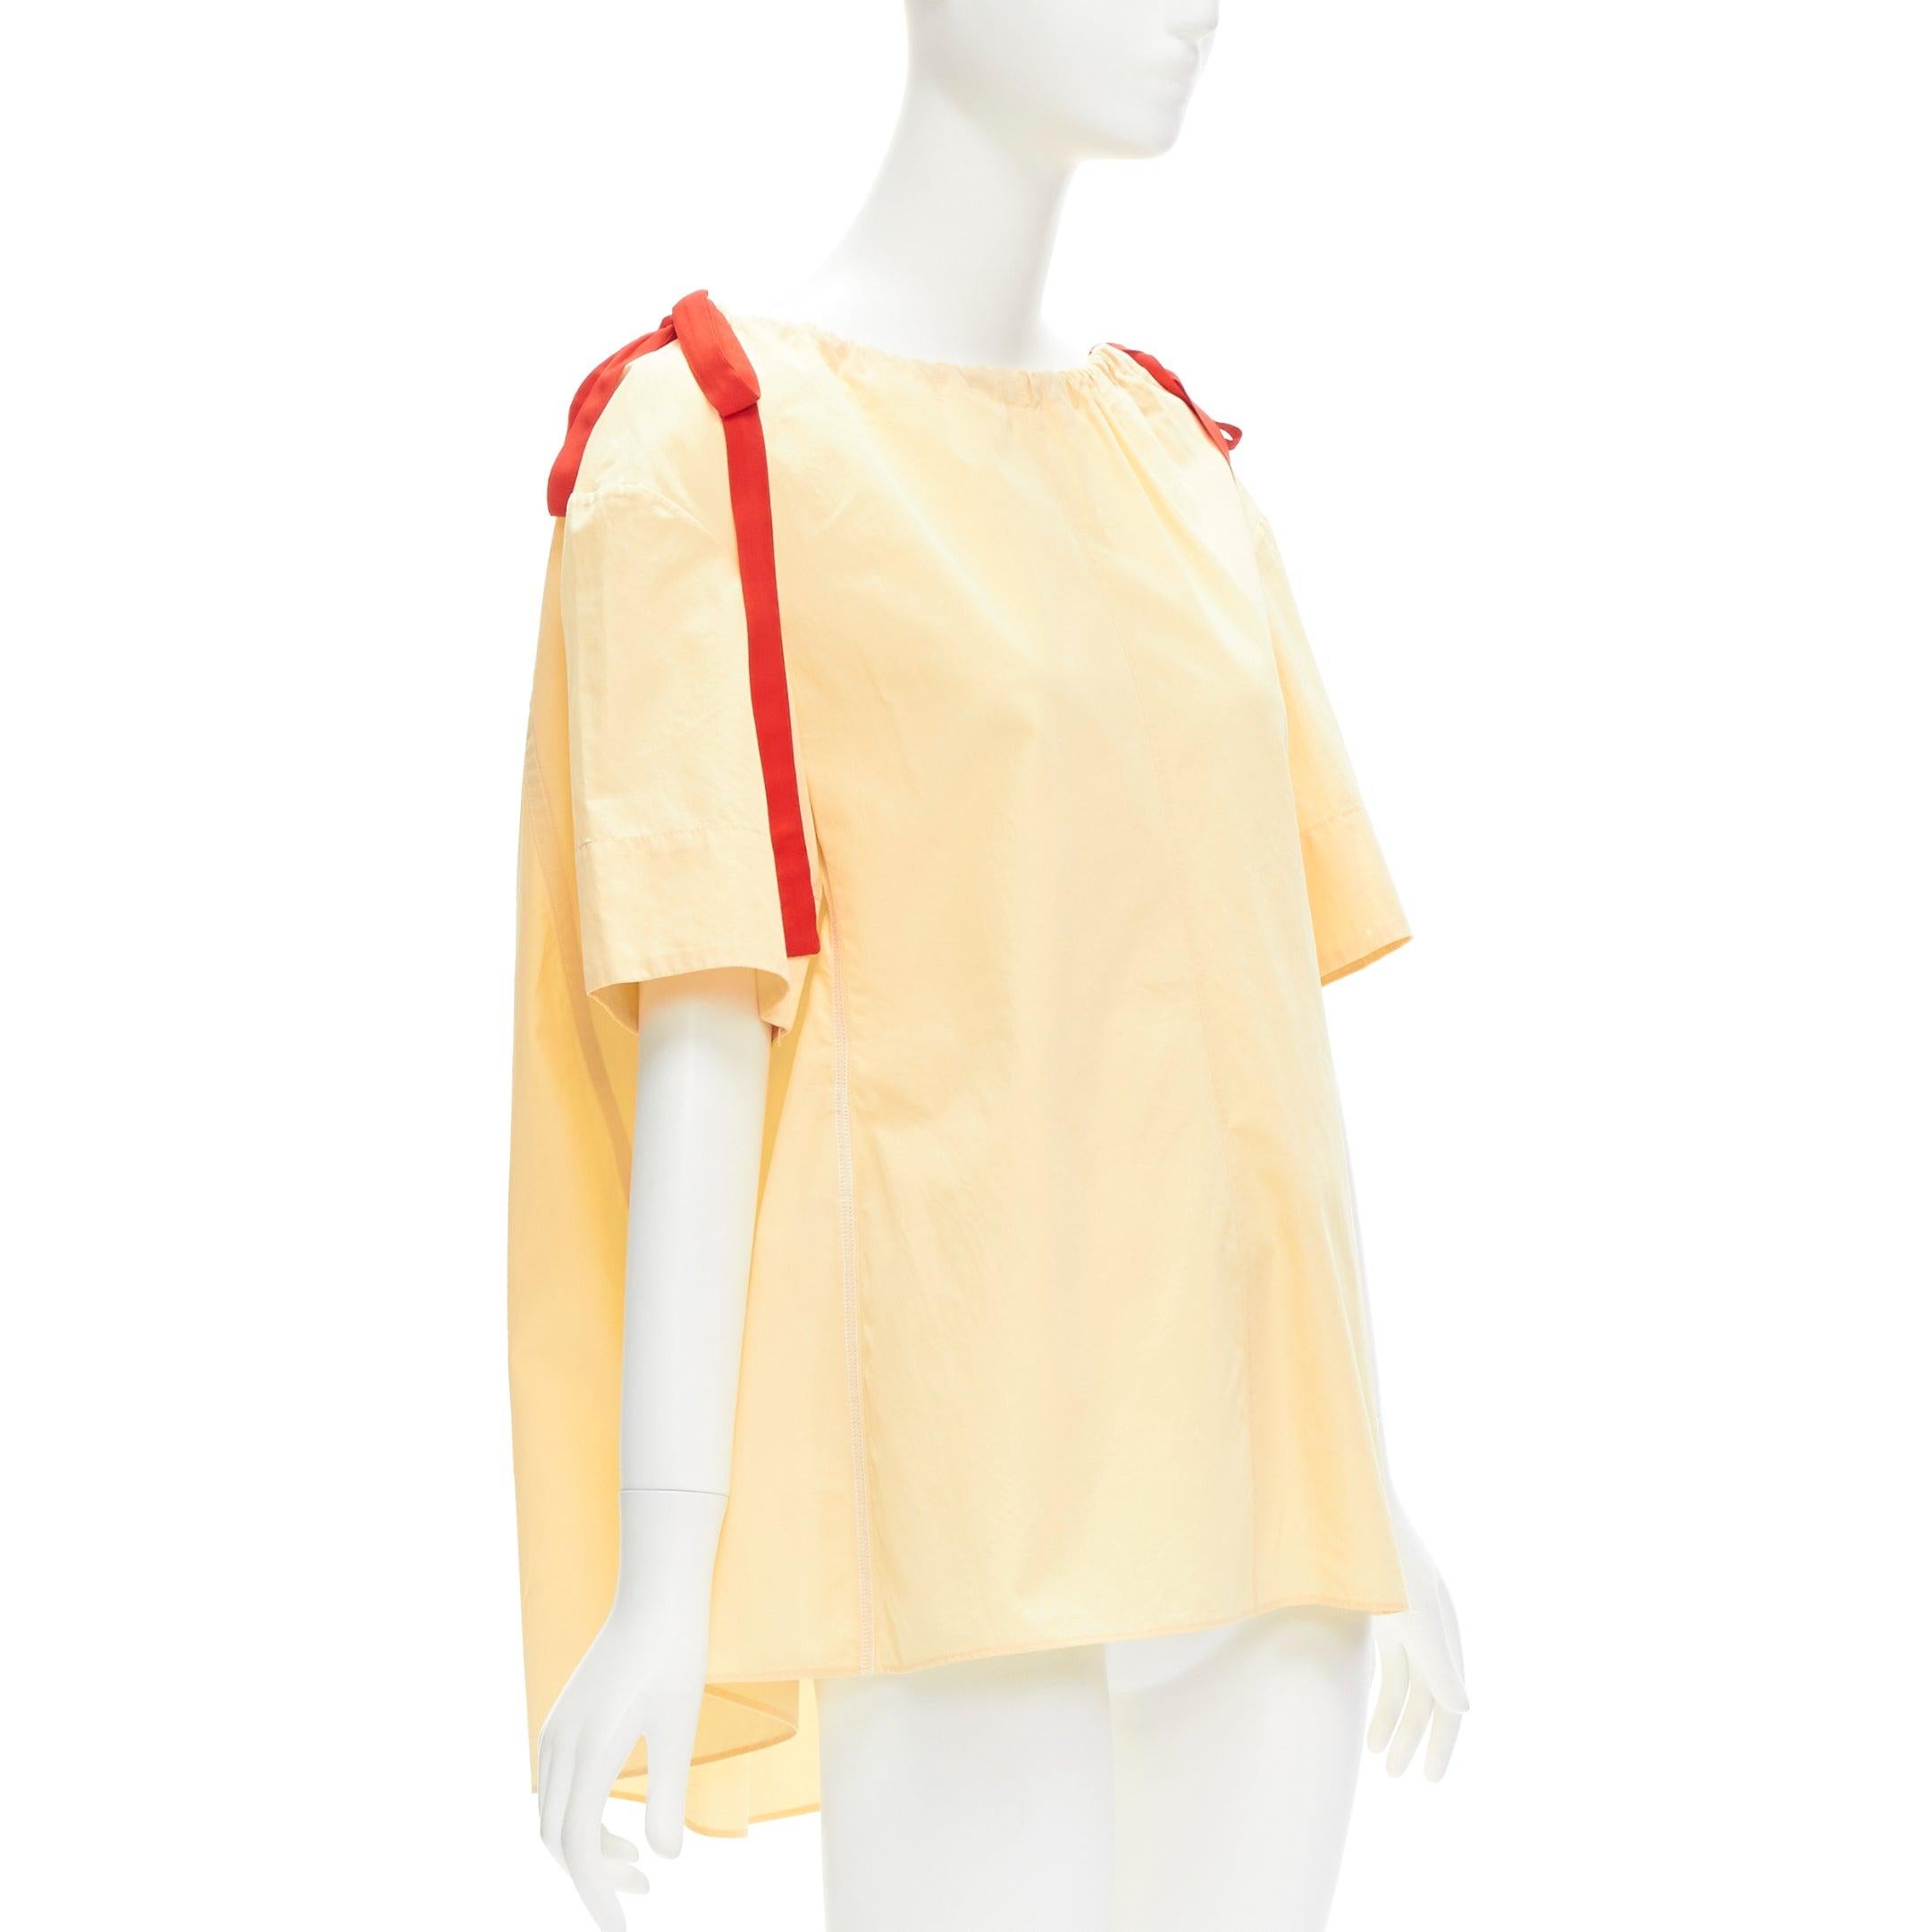 MARNI yellow 100% cotton red drawstring collar trapeze flared top IT36 XXS
Reference: CELG/A00322
Brand: Marni
Material: Cotton
Color: Yellow, Red
Pattern: Solid
Closure: Drawstring
Extra Details: Red drawstring collar design.
Made in: